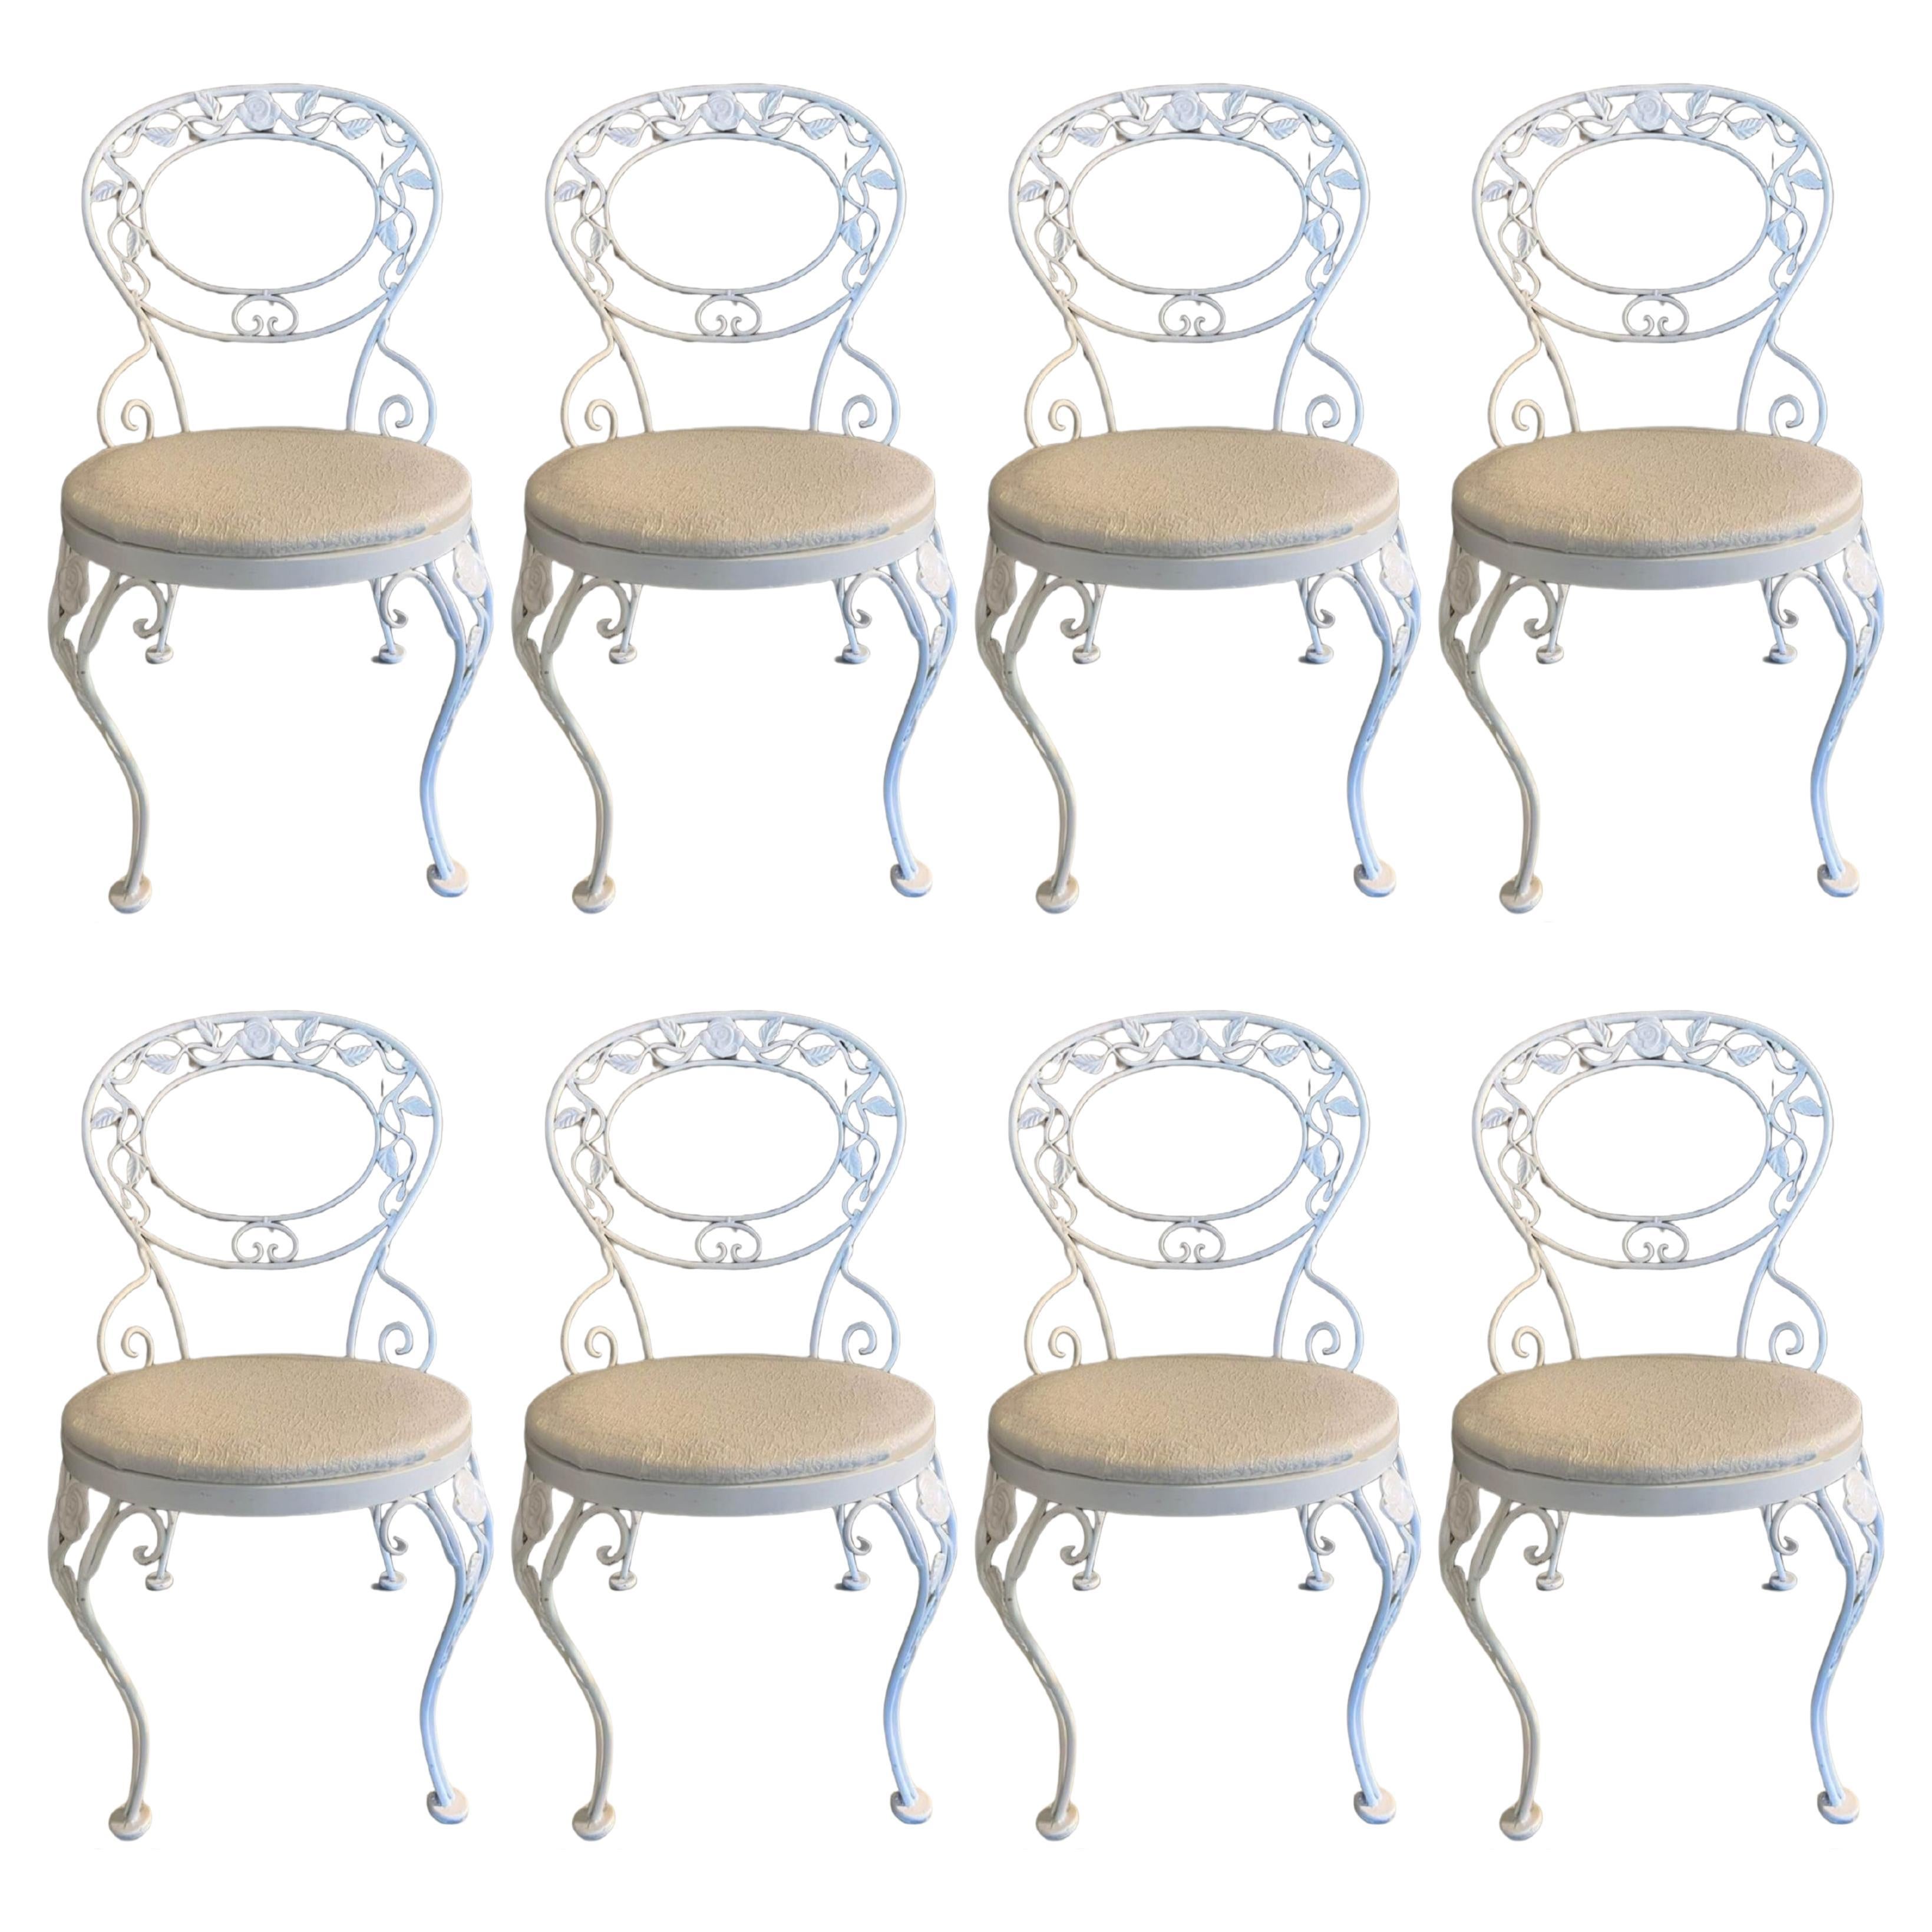 Woodard Wrought Iron Outdoor Patio Seating Set of 8 Chairs For Sale